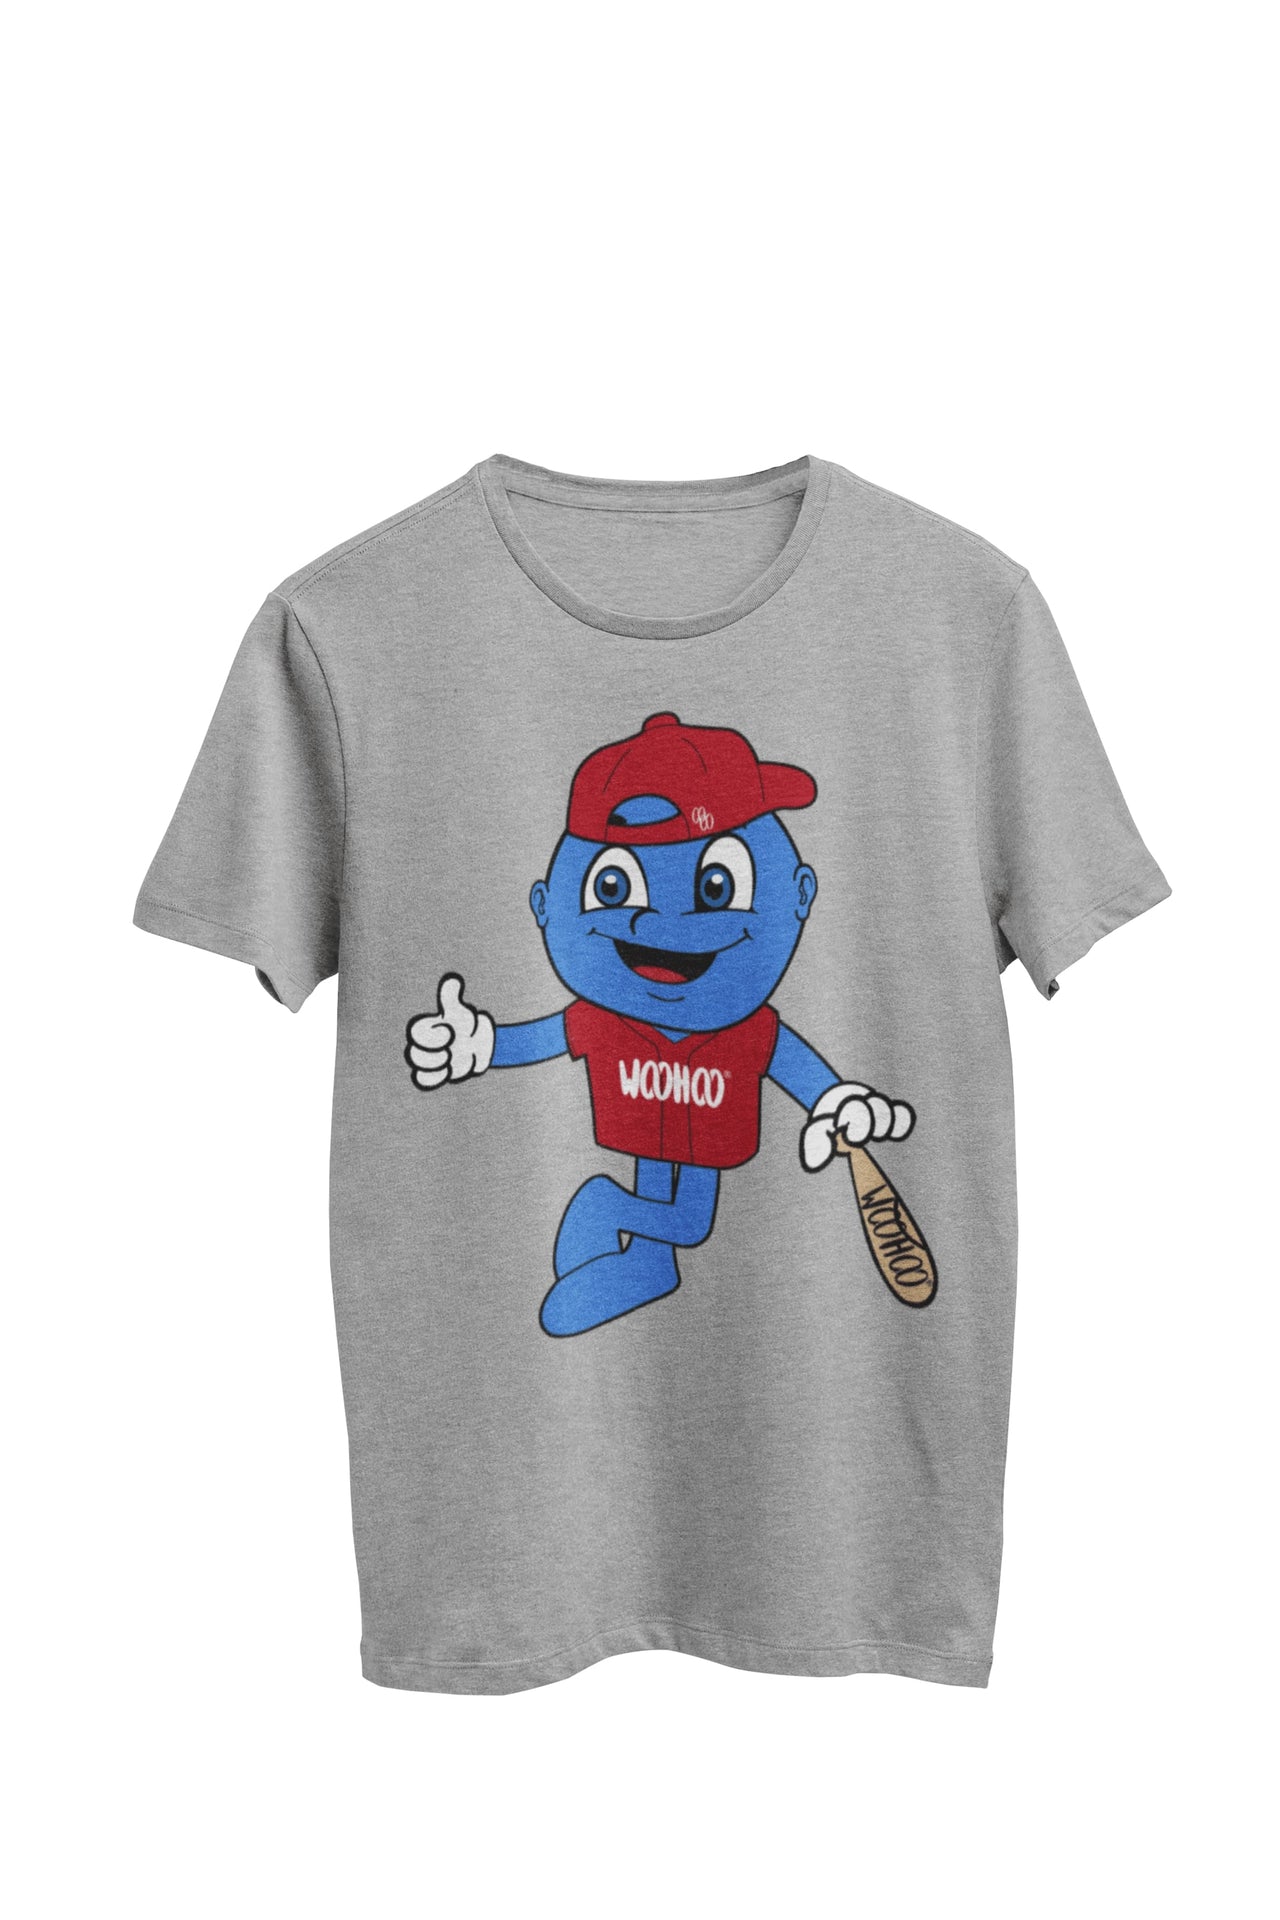 WooHooBerry, a baseball player, sporting a baseball uniform shirt with the inscription 'WooHoo,' casually leaning on a baseball bat that bears the text 'WooHoo.' His baseball cap is worn backwards, featuring the WooHoo Apparel logo. The gray T-shirt seamlessly blends with the sporty scene.